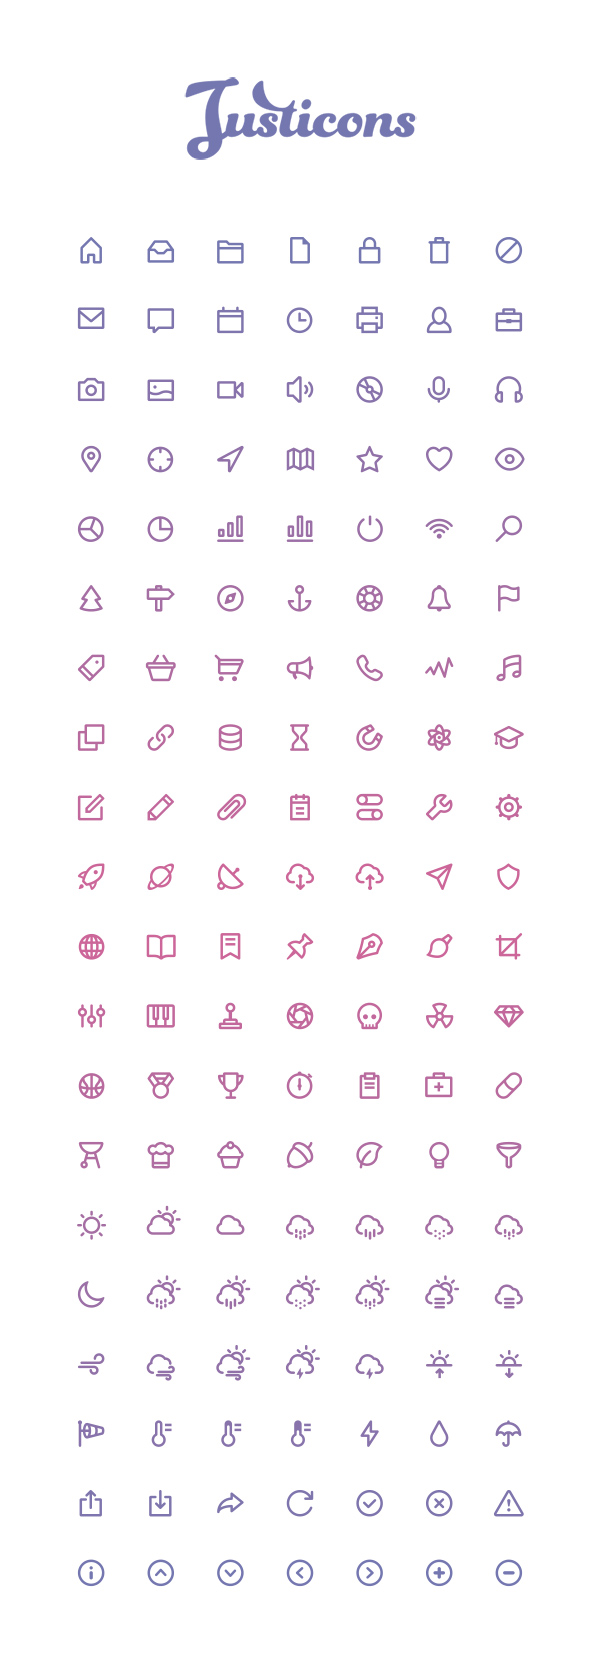 Free icons pack free icon download (15,648 Free icon) for 